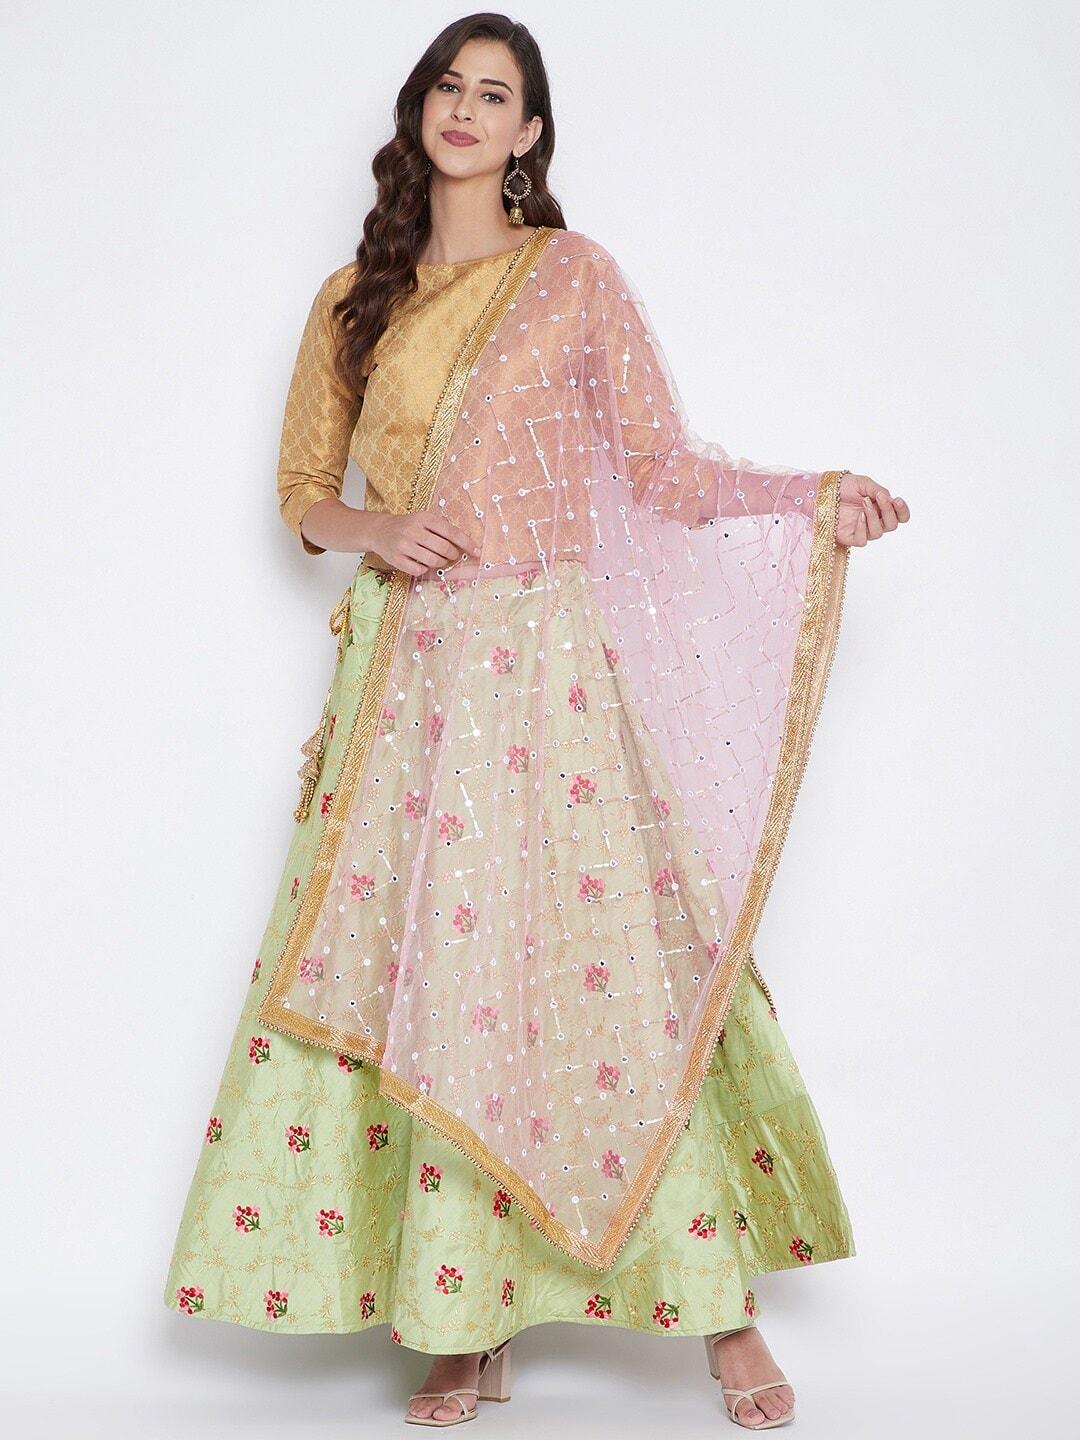 clora creation pink & gold-toned embroidered dupatta with sequinned